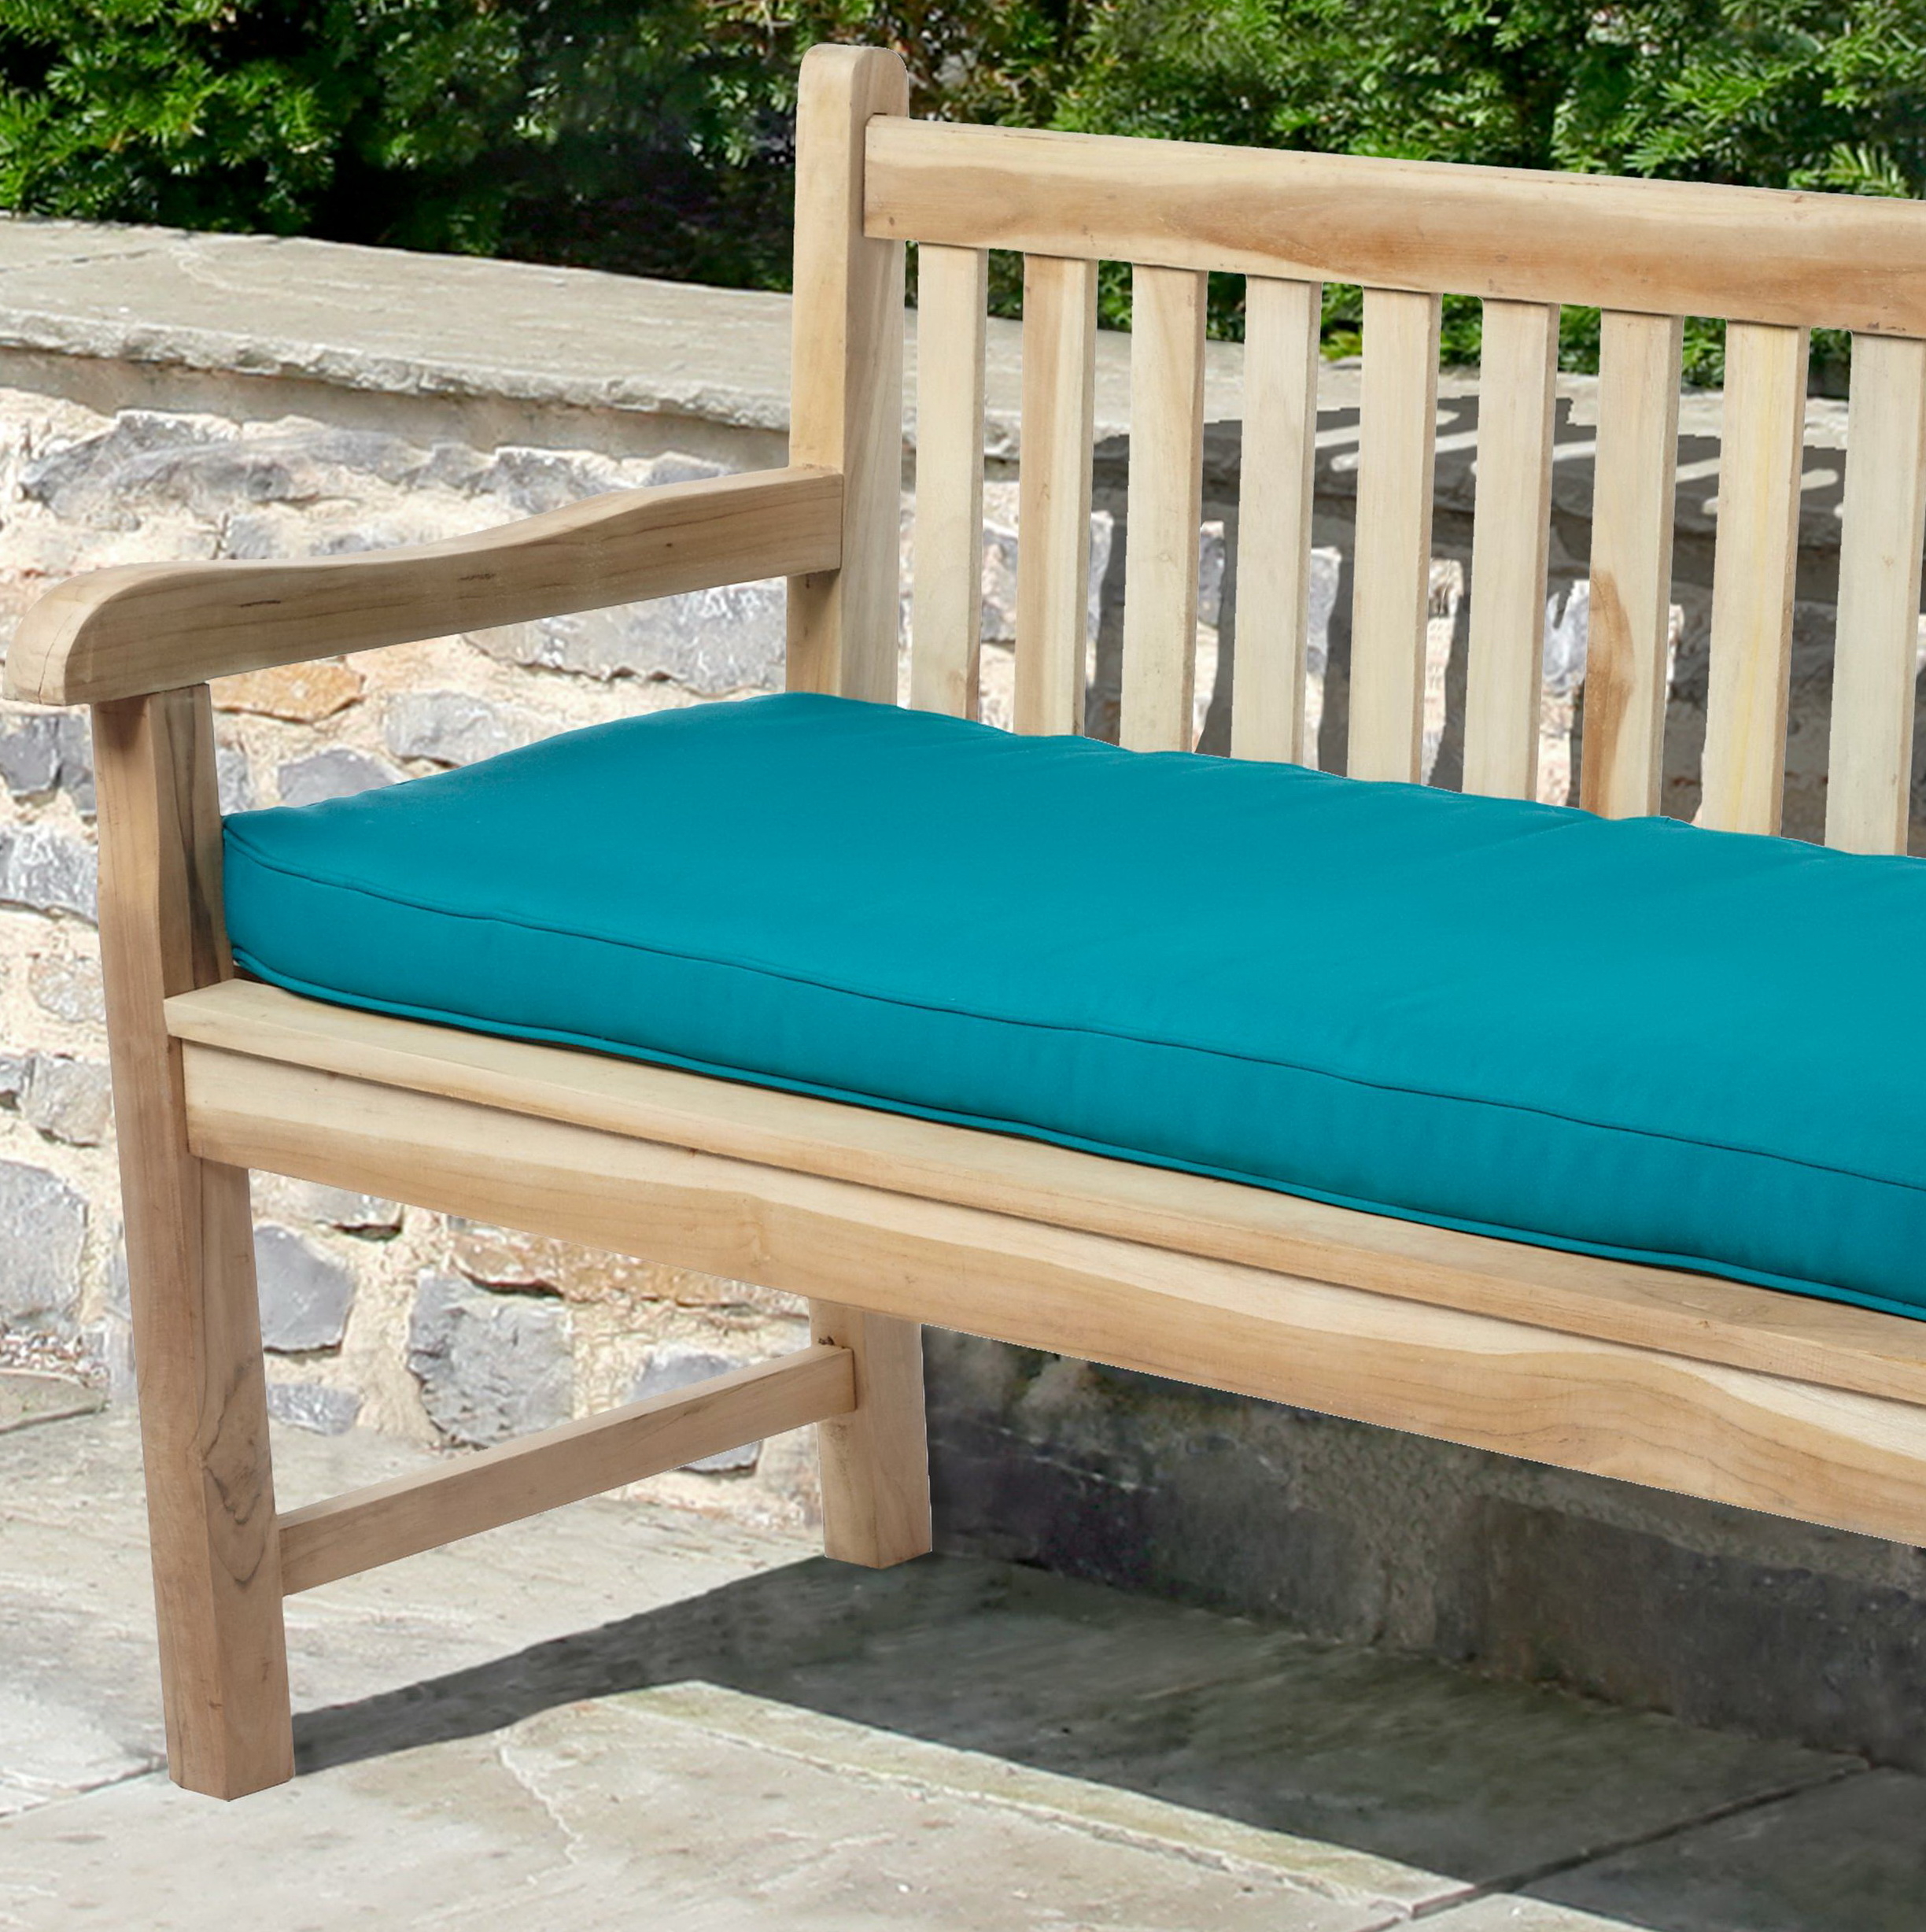 36 Inch Bench Cushion Youll Love In 2021 Visualhunt